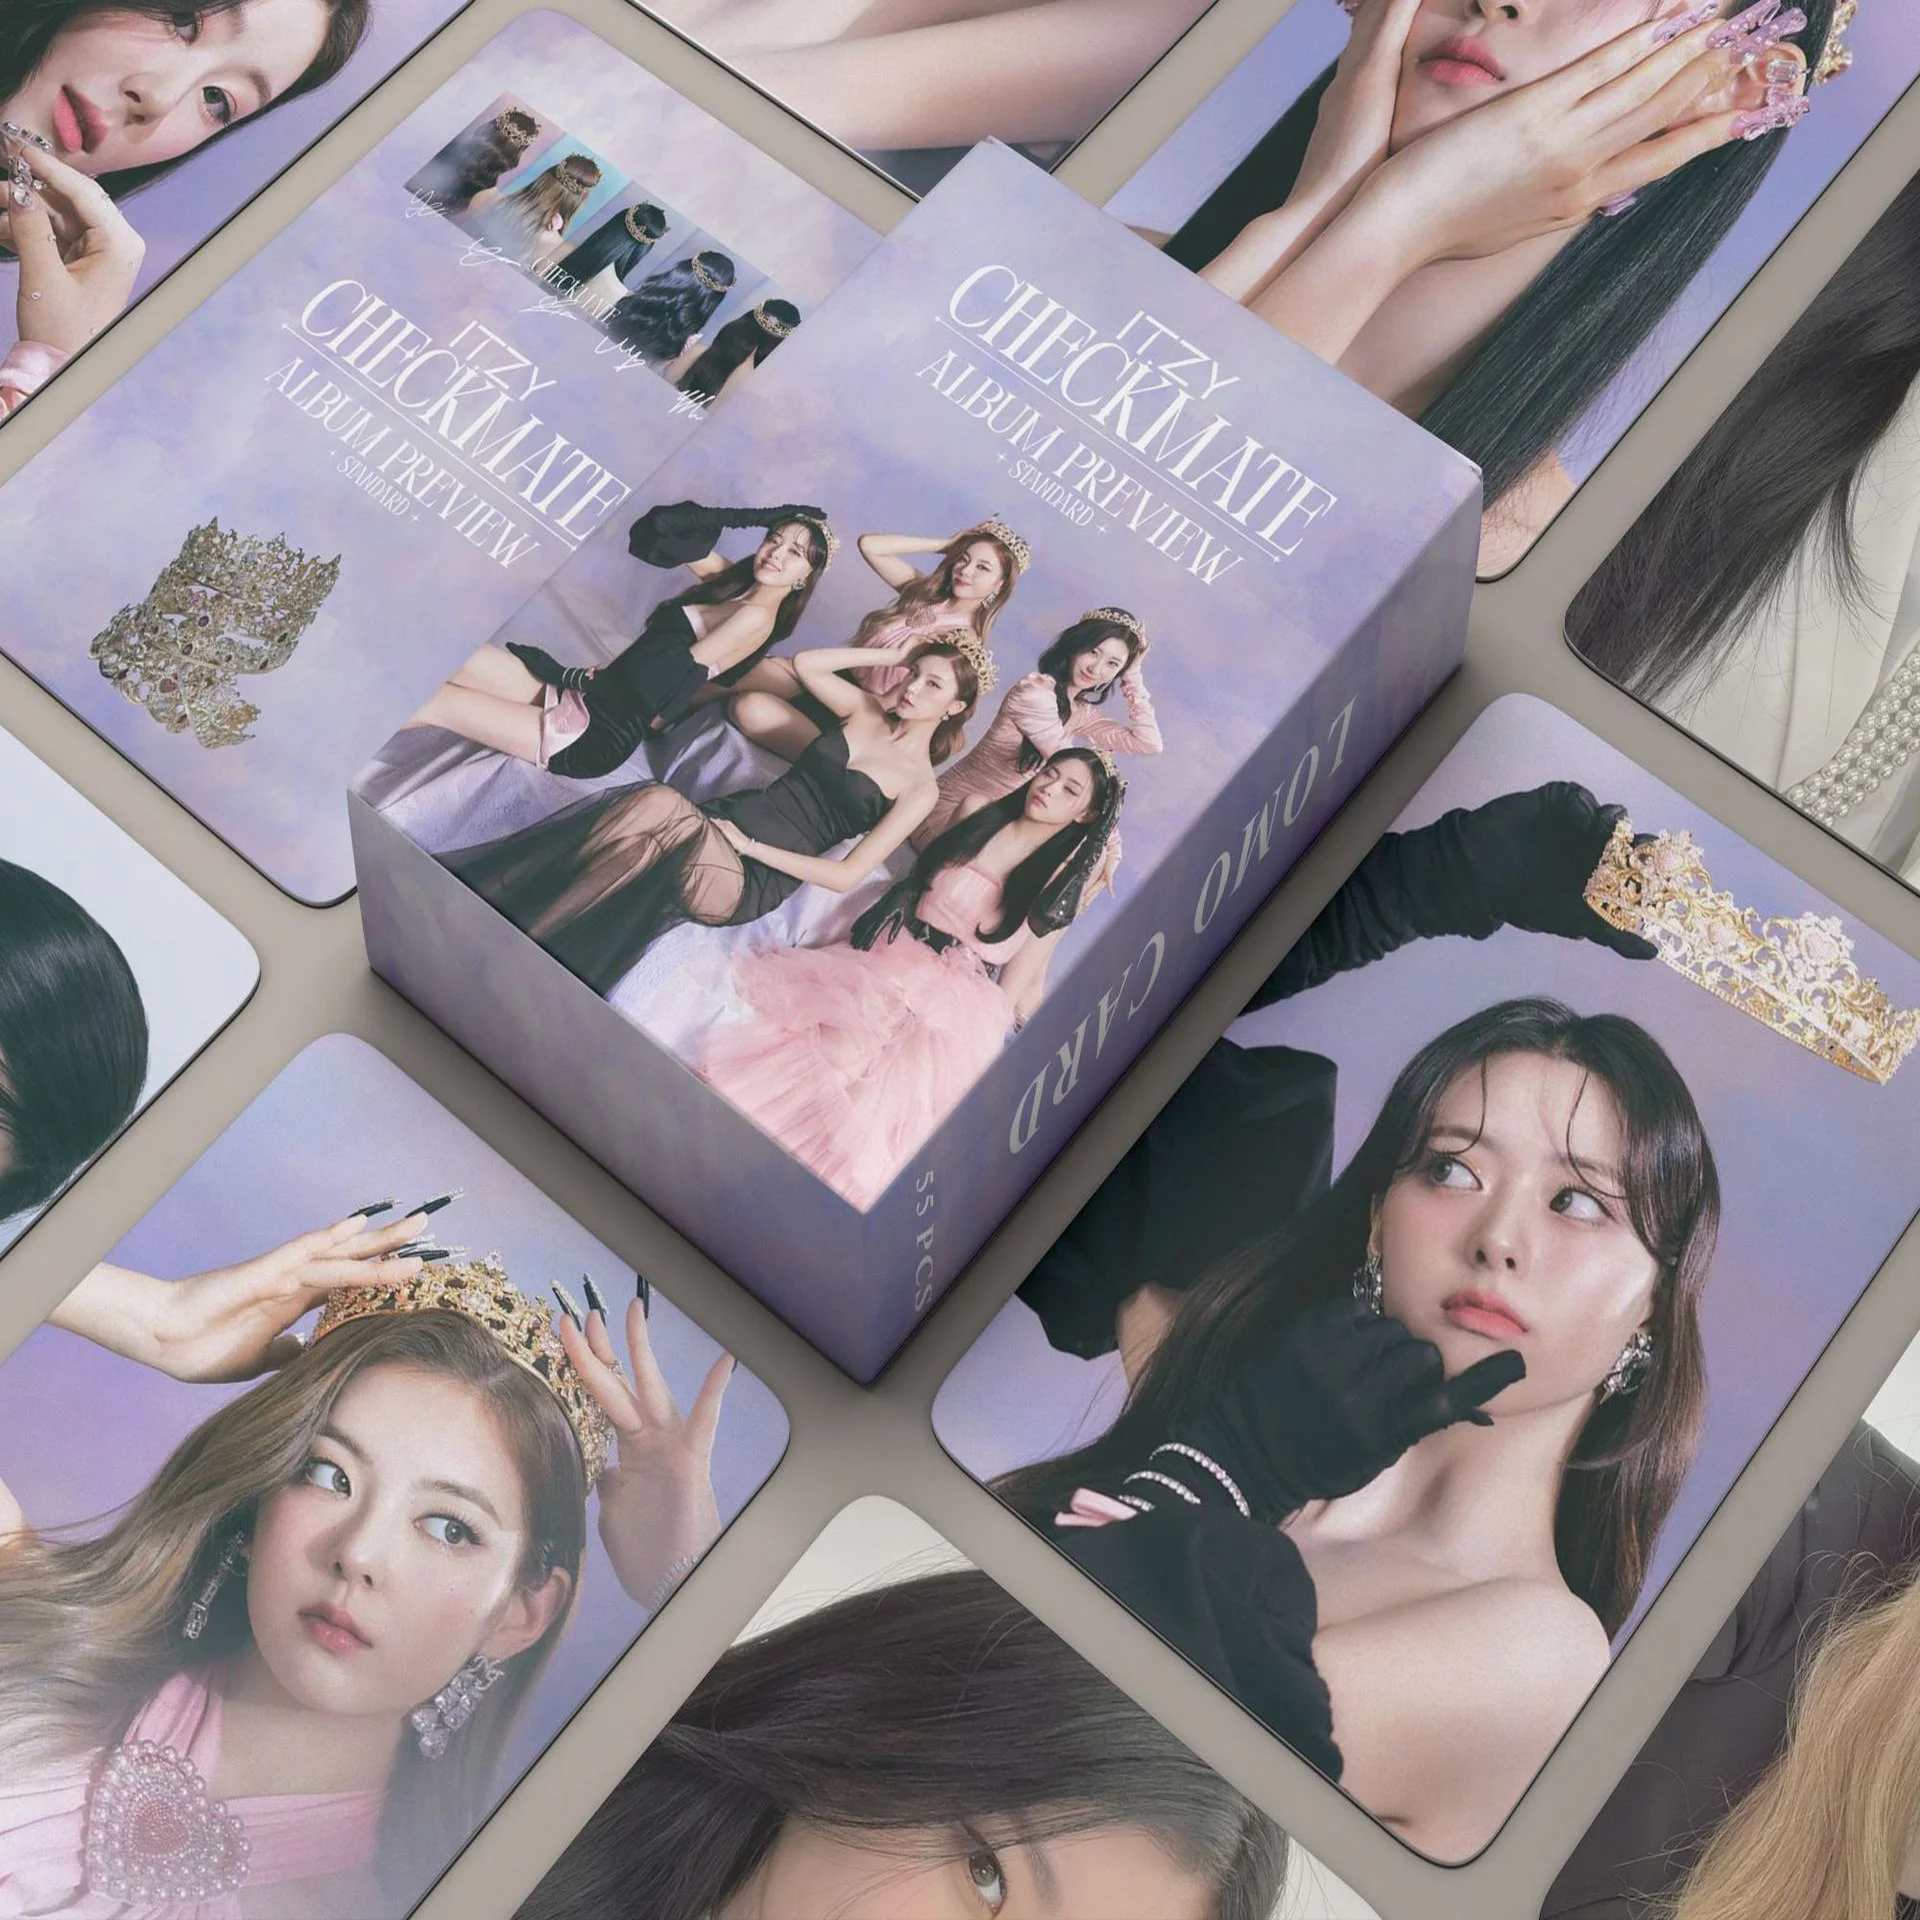 55pcs/set Kpop ITZY CHECKMATE BEST FRIENDS FOREVER Lomo Cards Greeting Season Photo album Cards Photocard Postcard Fashion 55pcs set kpop itzy lomo card 2024 season greeting new album kpop photocard korea idol photo print hd cards poster fans gifts